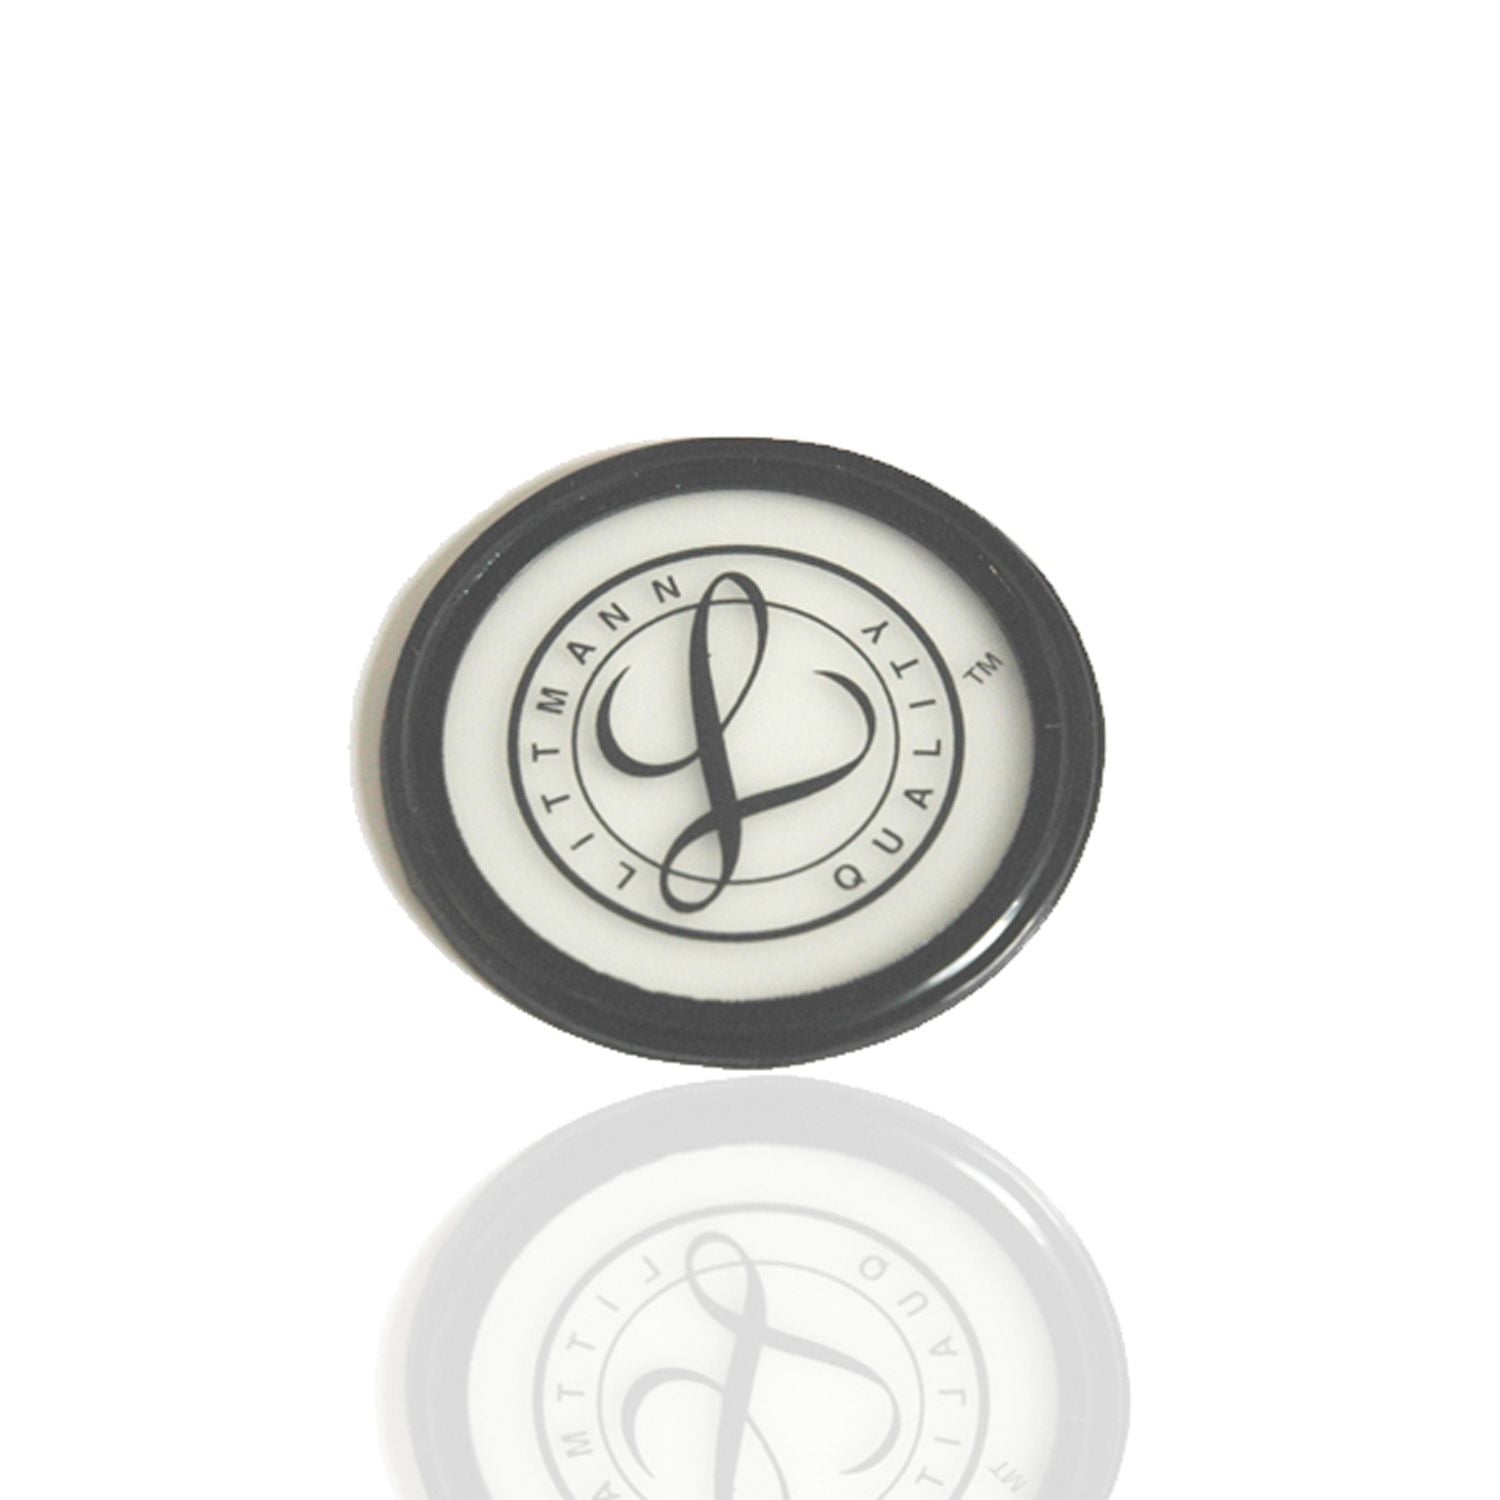 Tuneable Diaphragm & Rim Assembly for Master Cardiology | Grey (Single Piece)